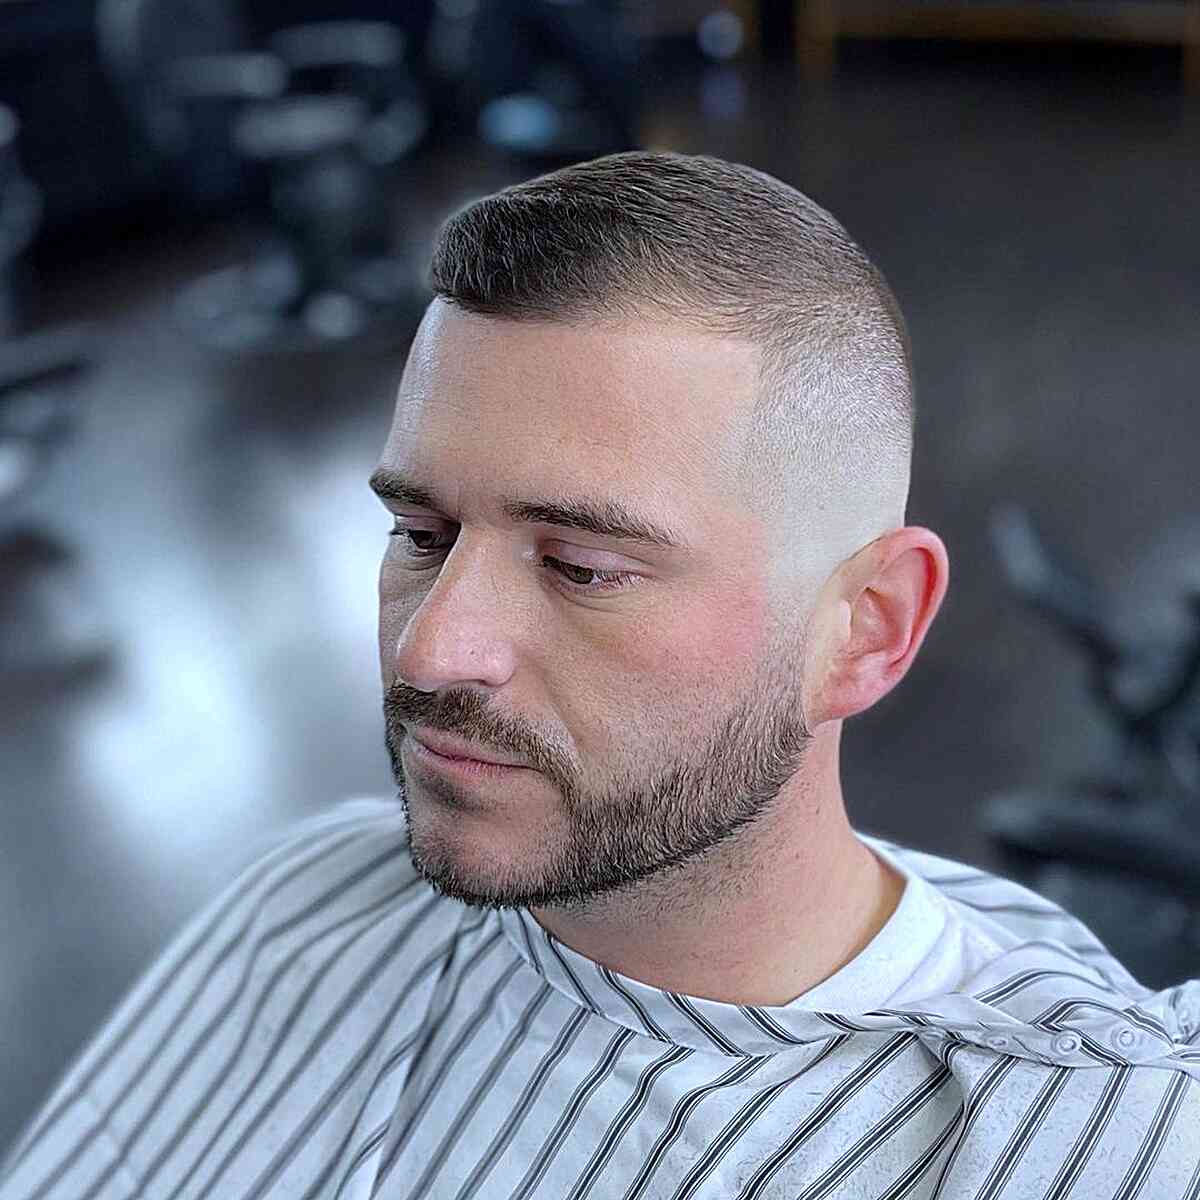 Best Short Hairstyles and Haircuts for Men | HWT Clinic's Blog